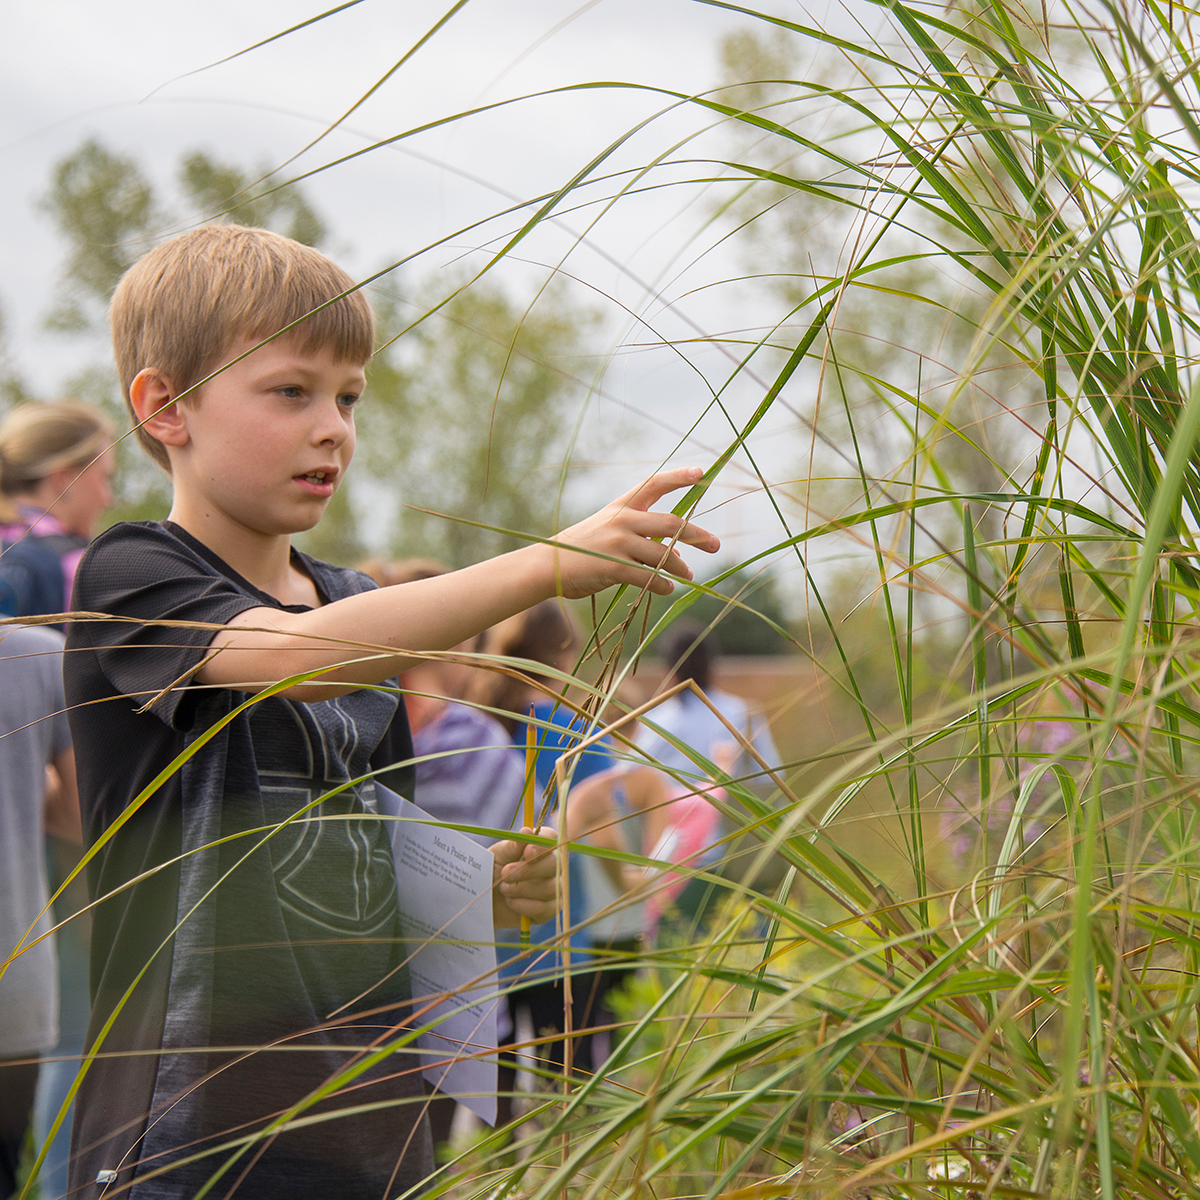 Kids become ecologists on Ms. Frizzle-worthy Garden field trips